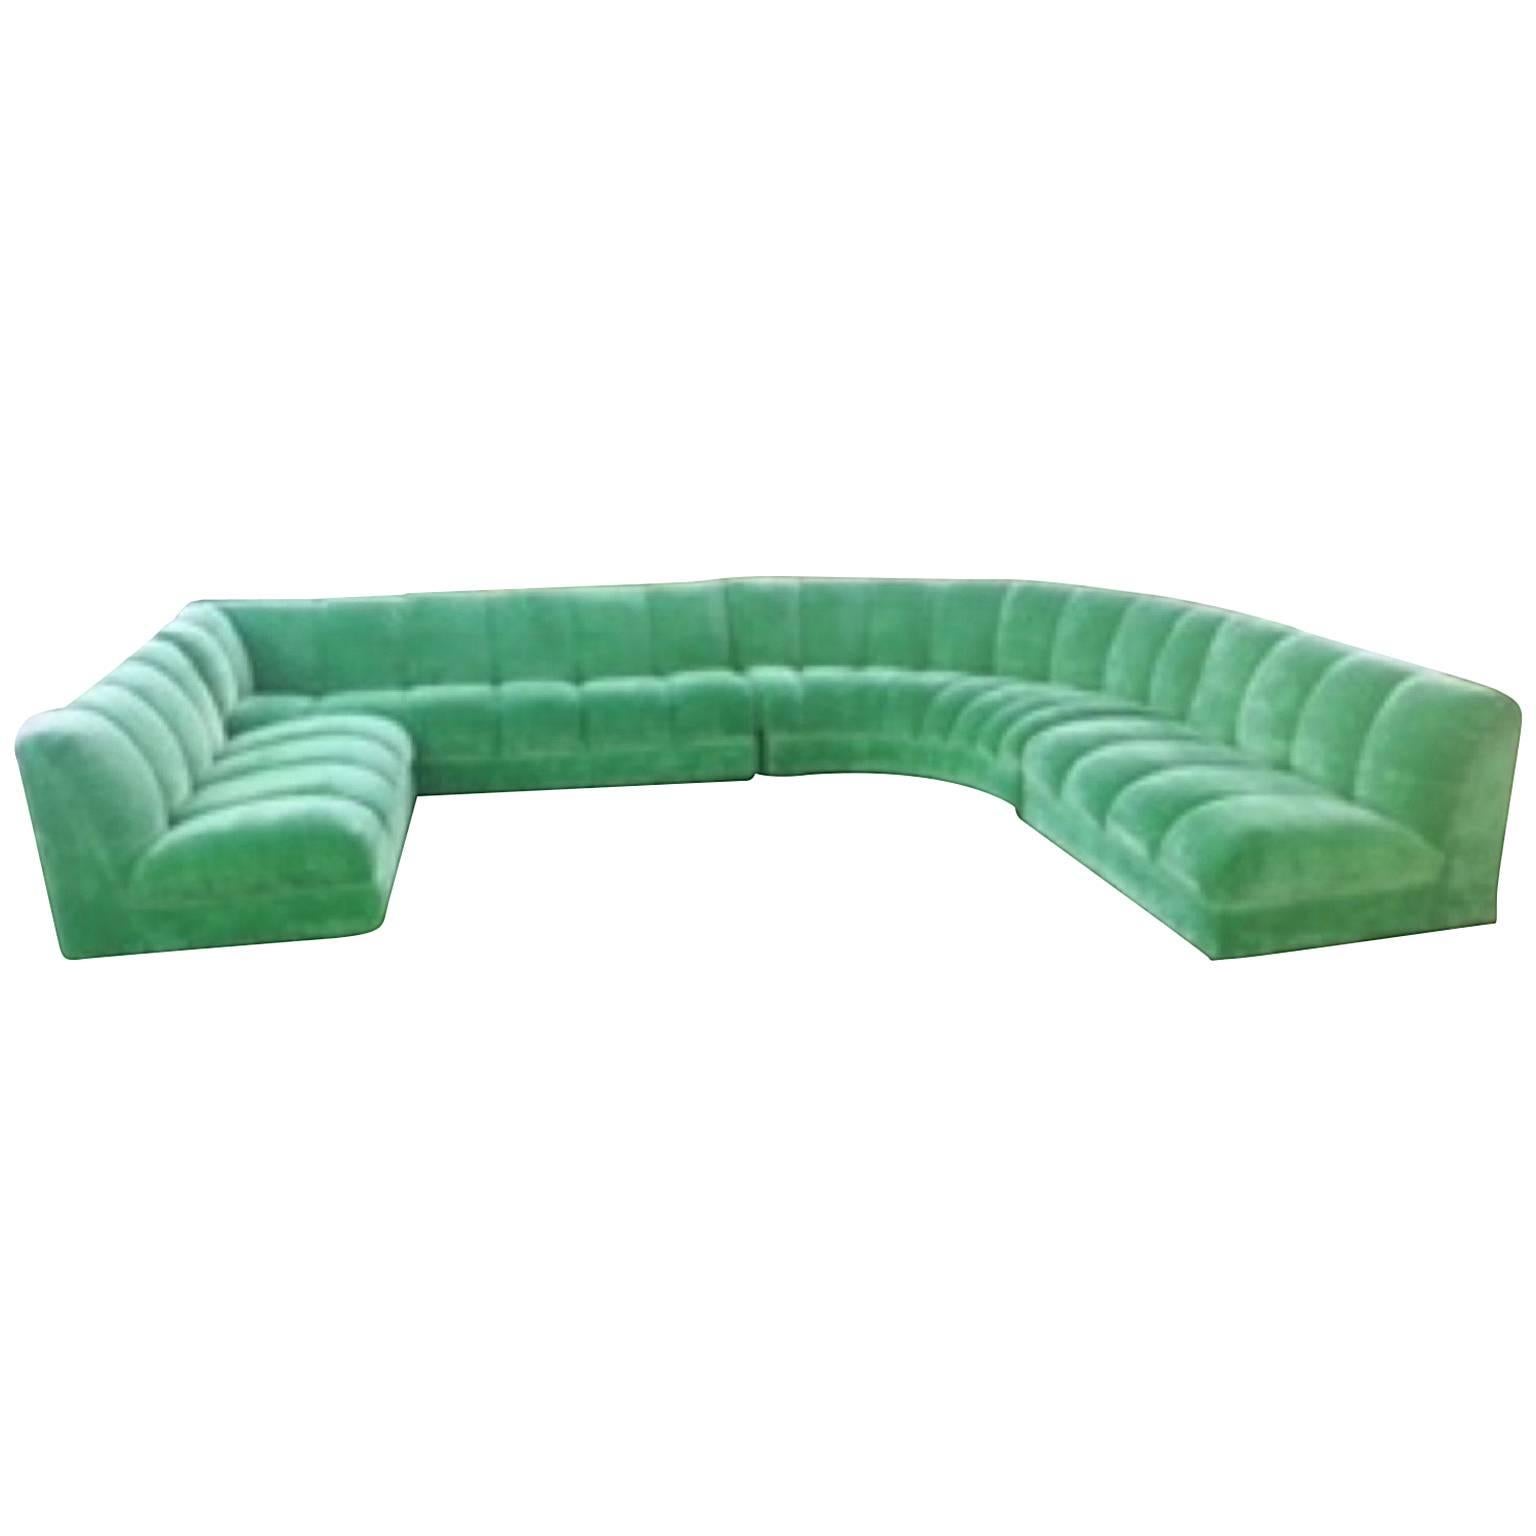 Four-Piece Sectional Couch in the Style of Milo Baughman, Channel Back 